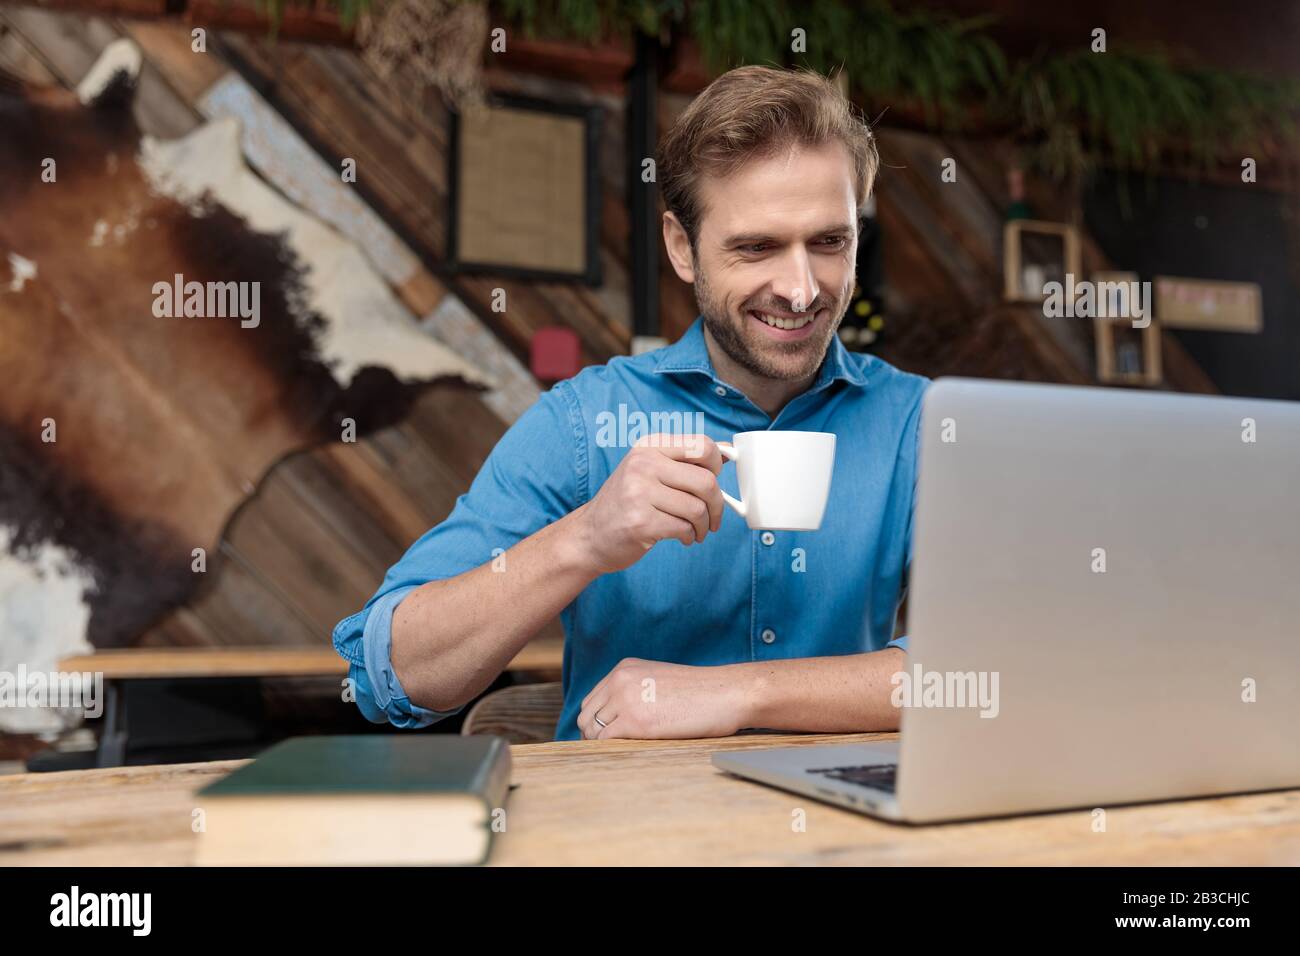 Joyful casual man reading, laughing, and drinking his coffee while wearing a blue shirt, sitting at a desk on coffeeshop background Stock Photo